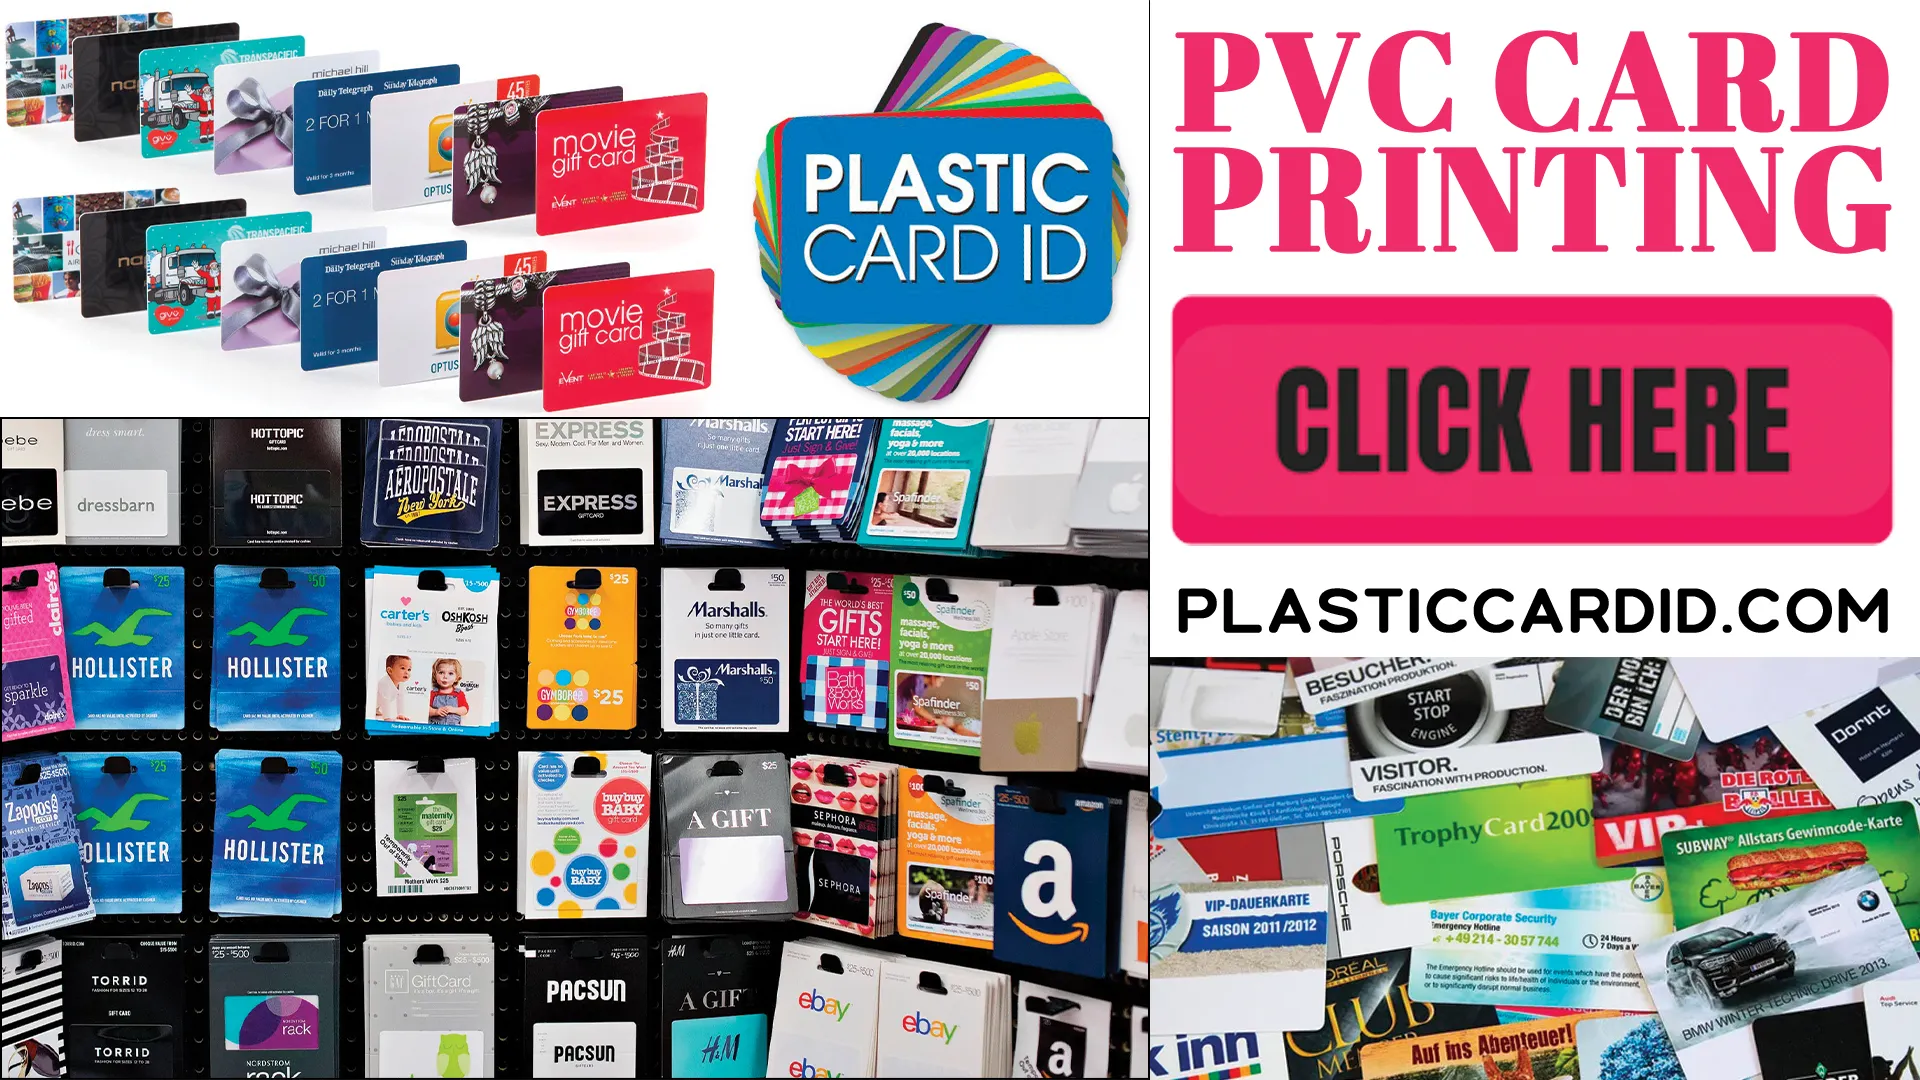 Seamless Supply of Plastic Cards and Printers